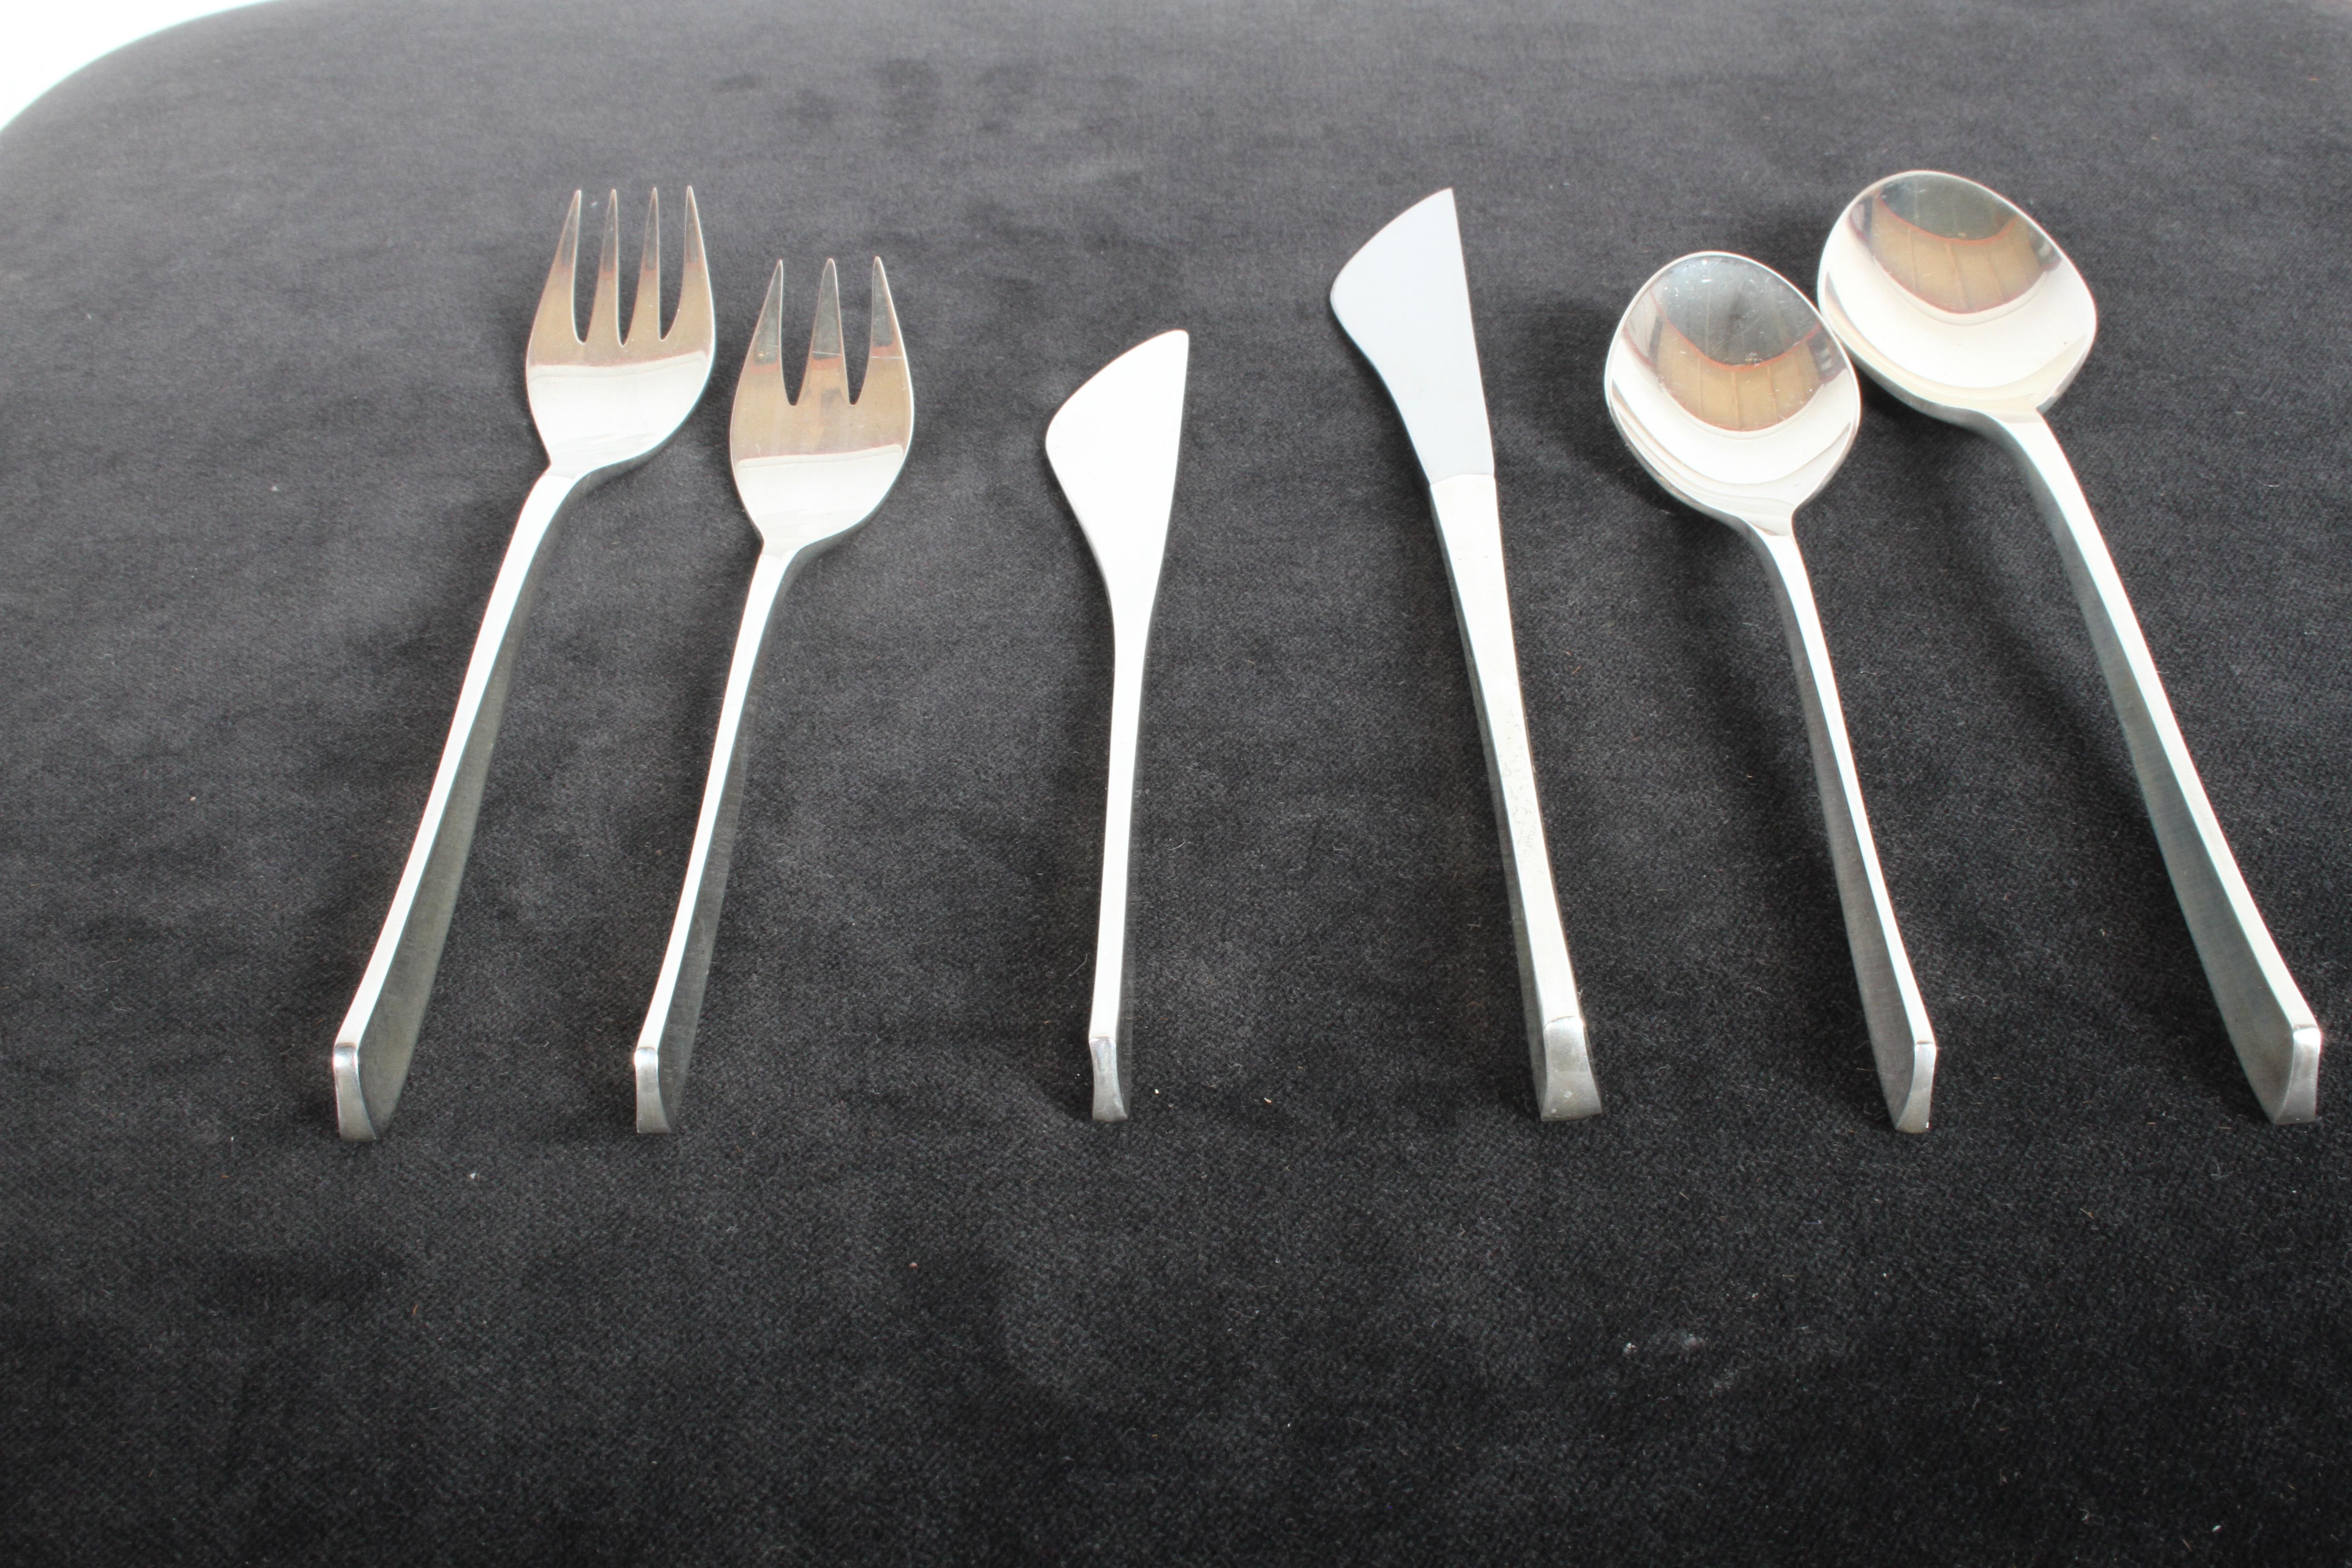 Vintage set of Mid-Century Modern International Sterling Silver flatware in the pattern Vision designed by Ronald Hayes Pearson designed in 1961. This table setting for 12 was lightly used, if used at all, comes with vintage cloth bags. 

Set